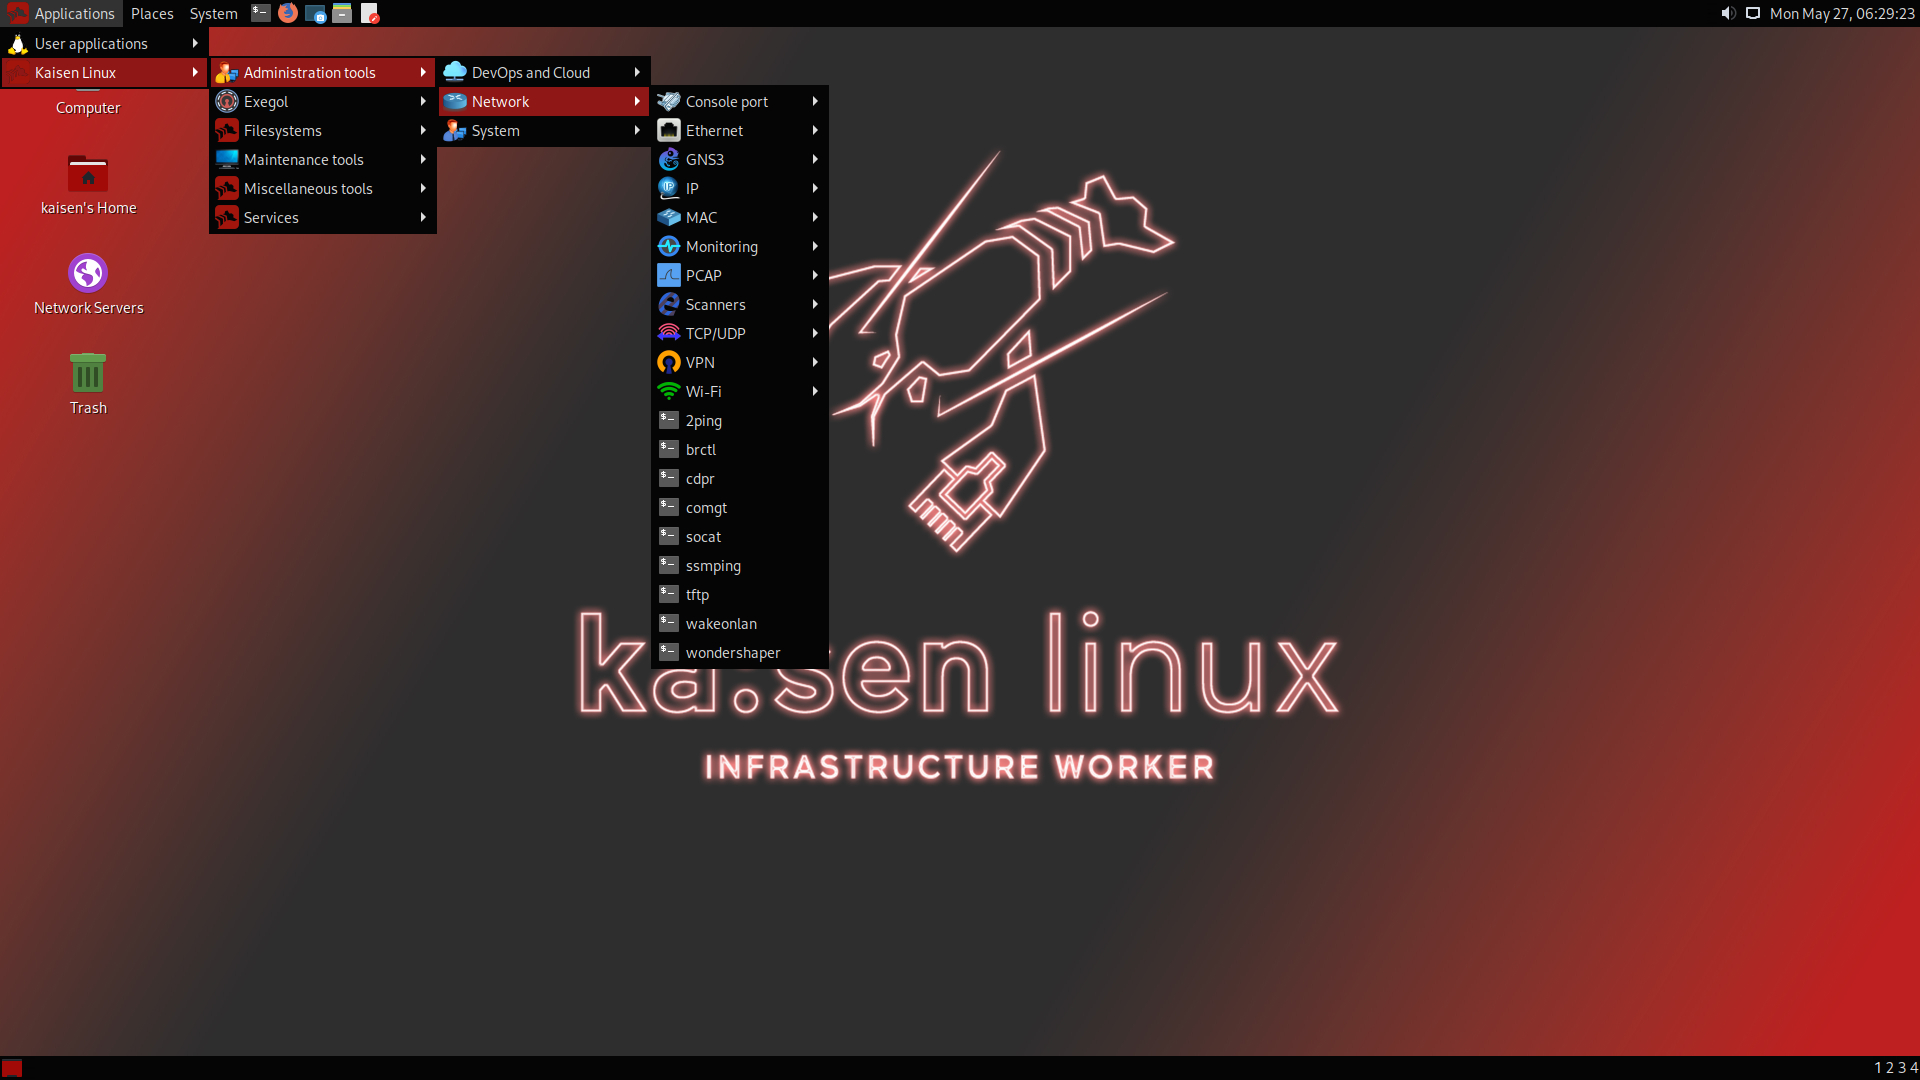 kaisen linux mate with network administration tools menu